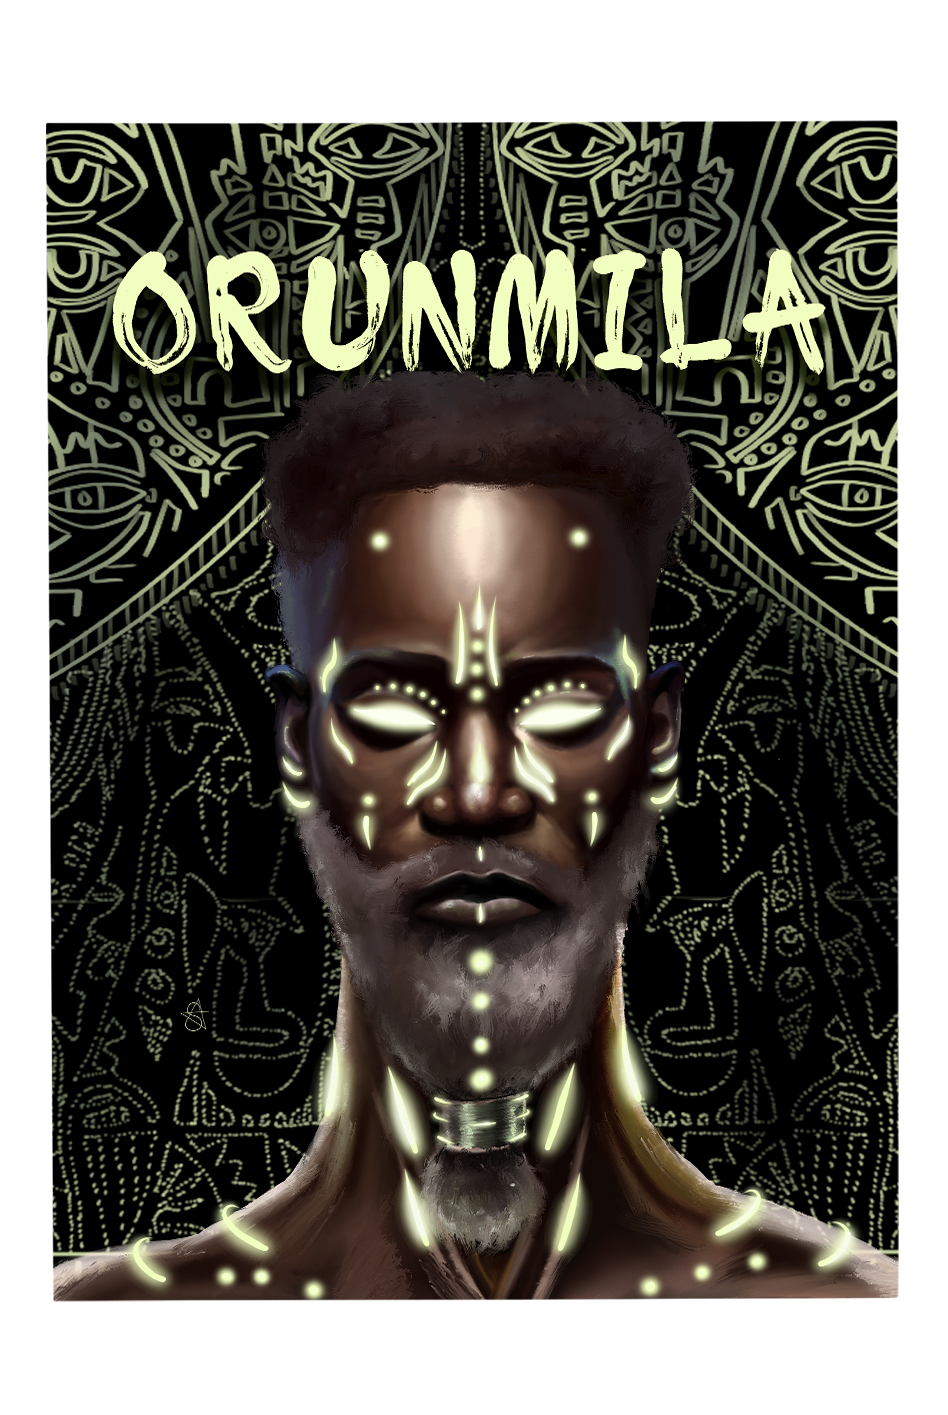 Orunmila Holographic Art Print on high-quality matte or velvet paper, framed in gallery black, white, or natural maple, depicting Yoruba Orisa who is a master diviner and healer.